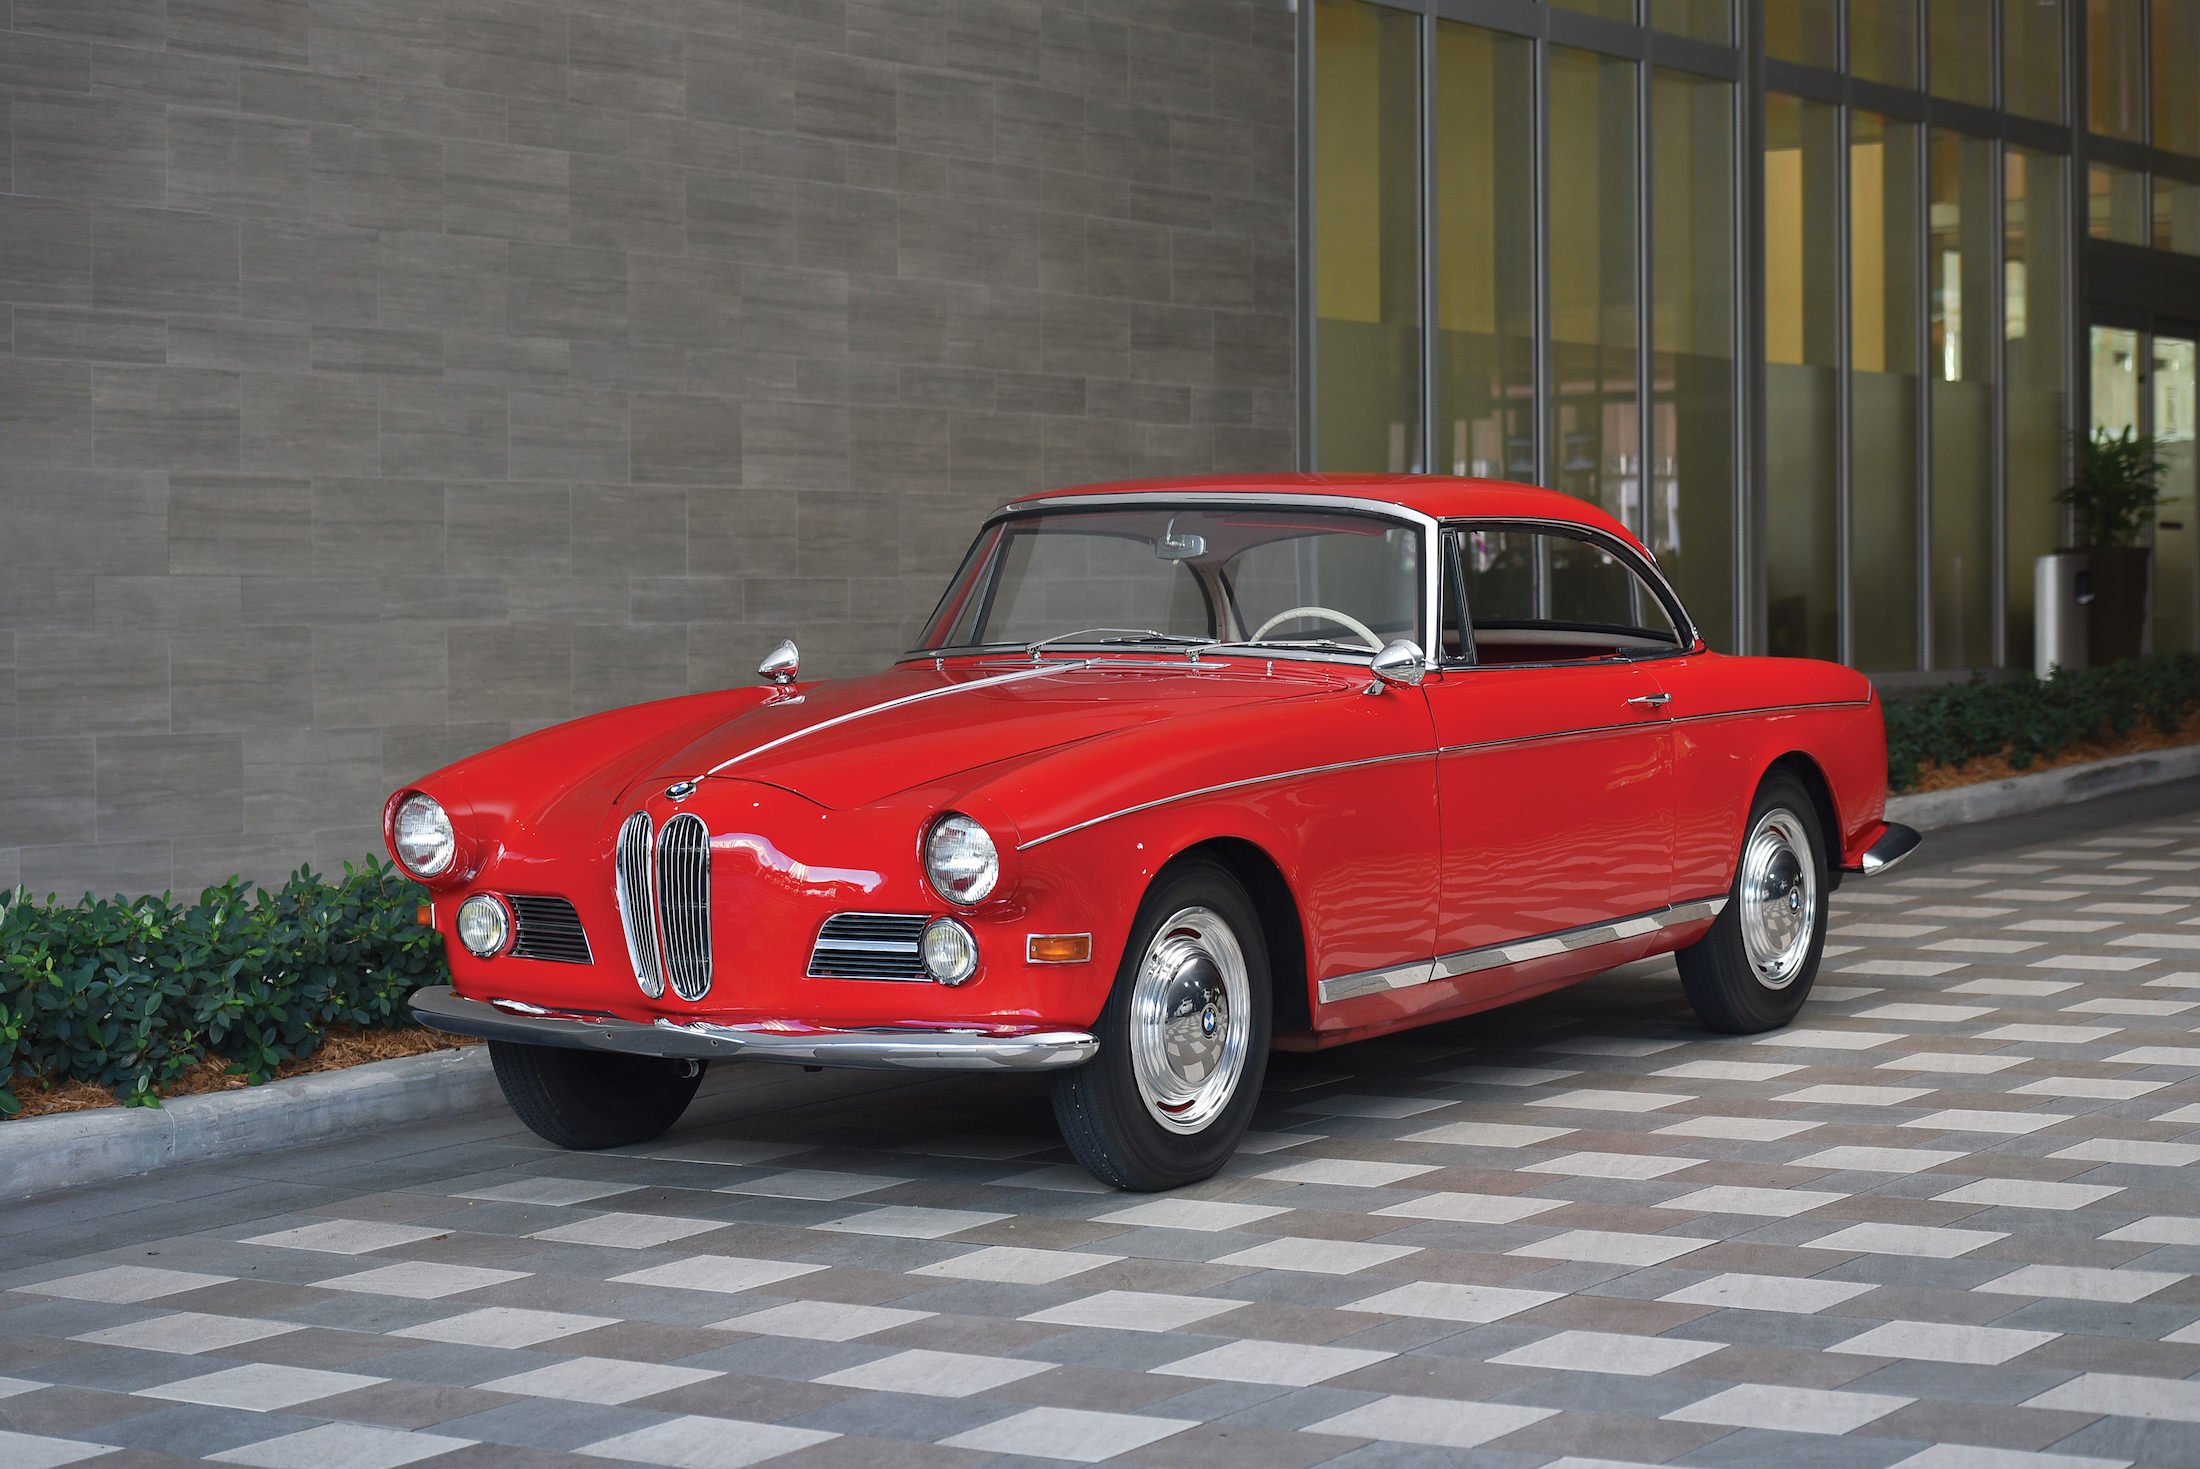 BMW 503 - The Car That Nearly Bankrupted BMW